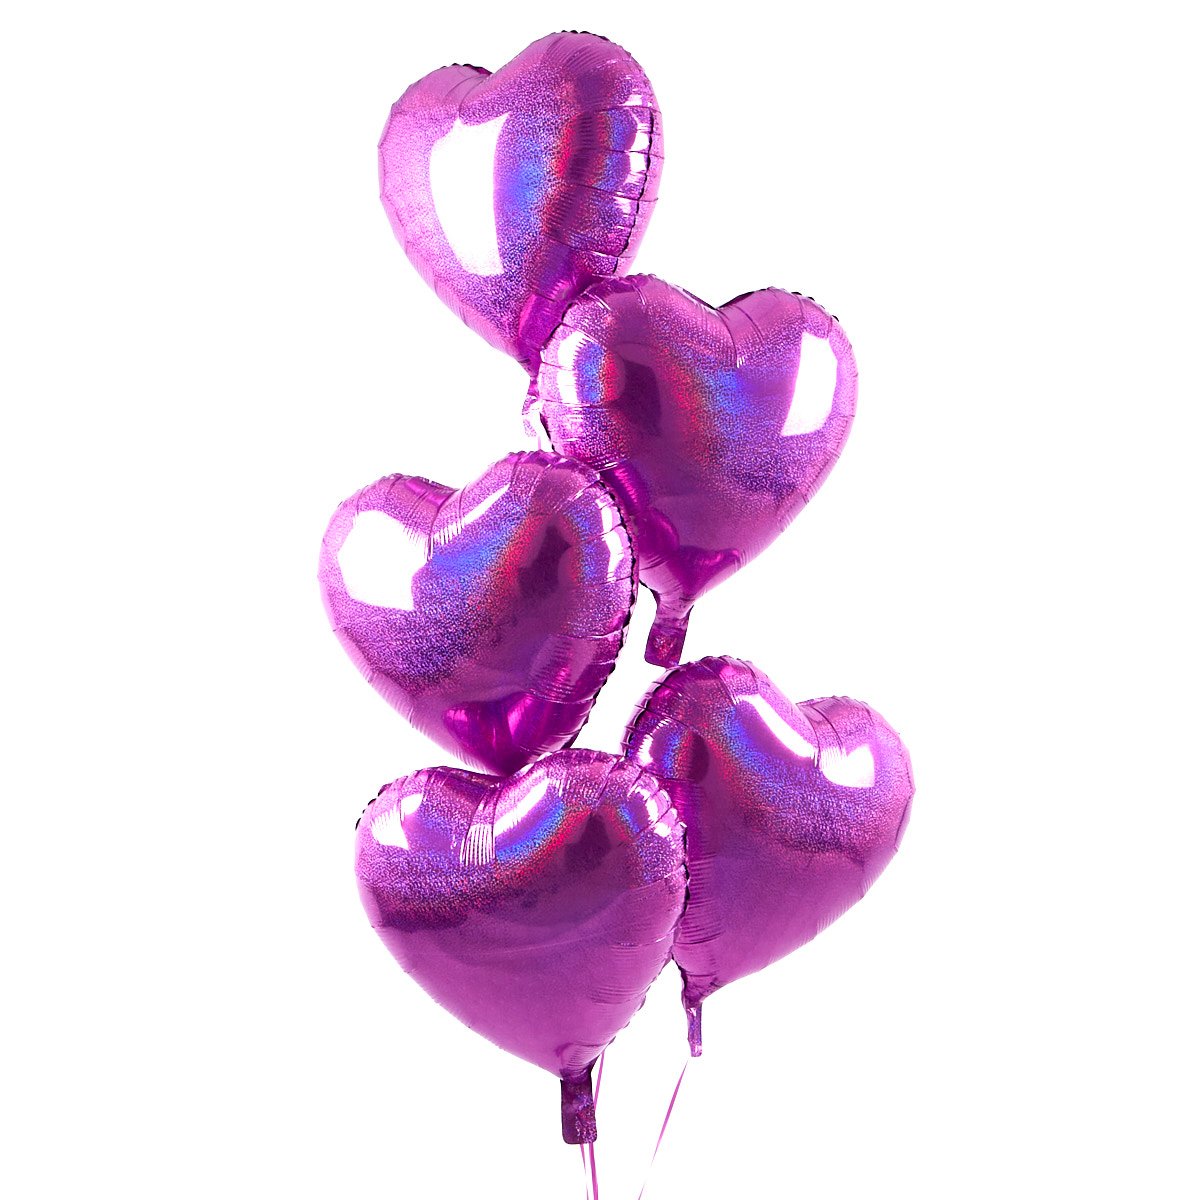 5 Light Pink Hearts Balloon Bouquet - DELIVERED INFLATED!